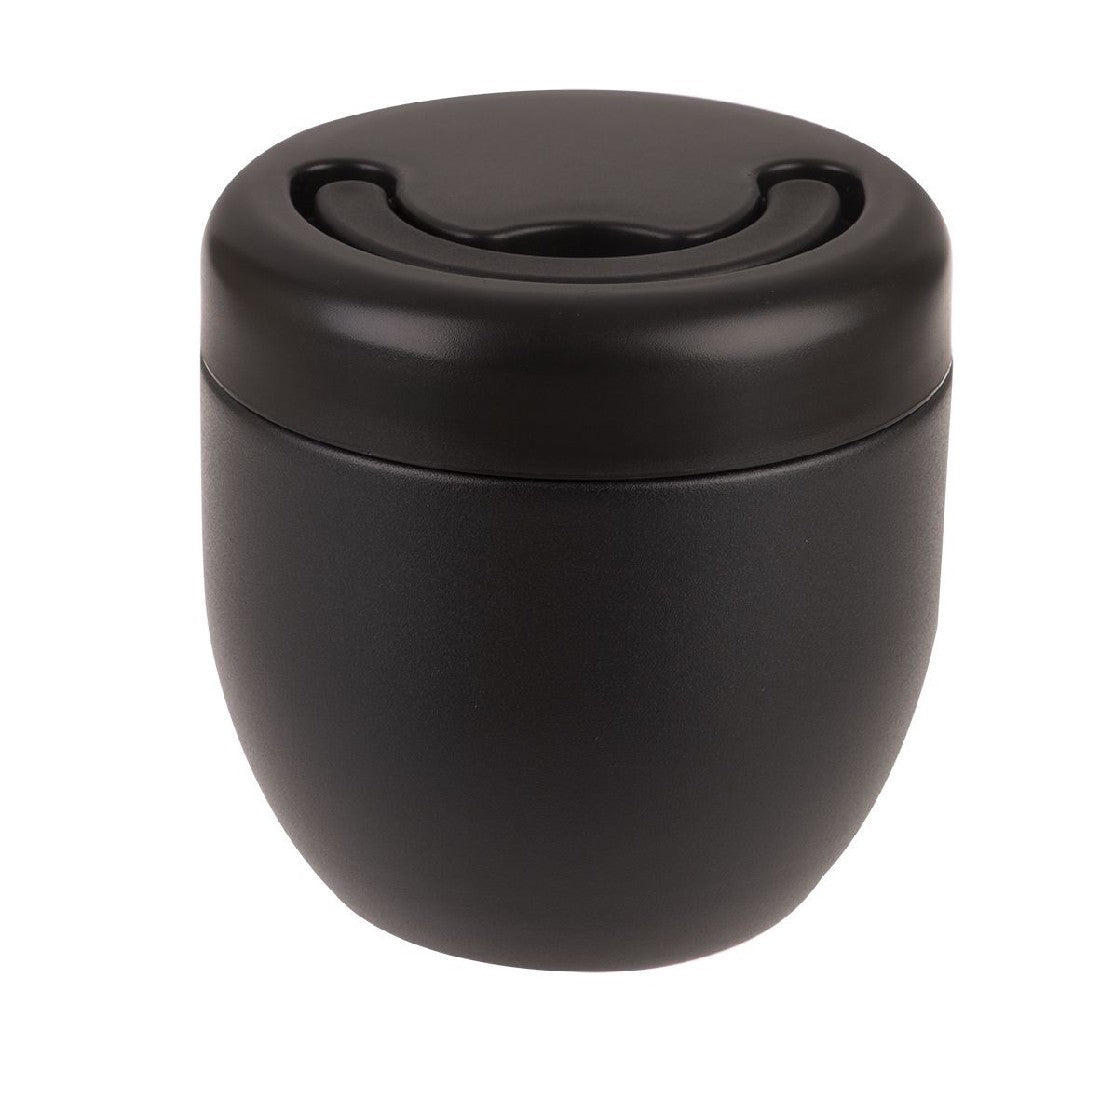 Oasis S/s Double Wall Insulated Food Pod 470ml - Black